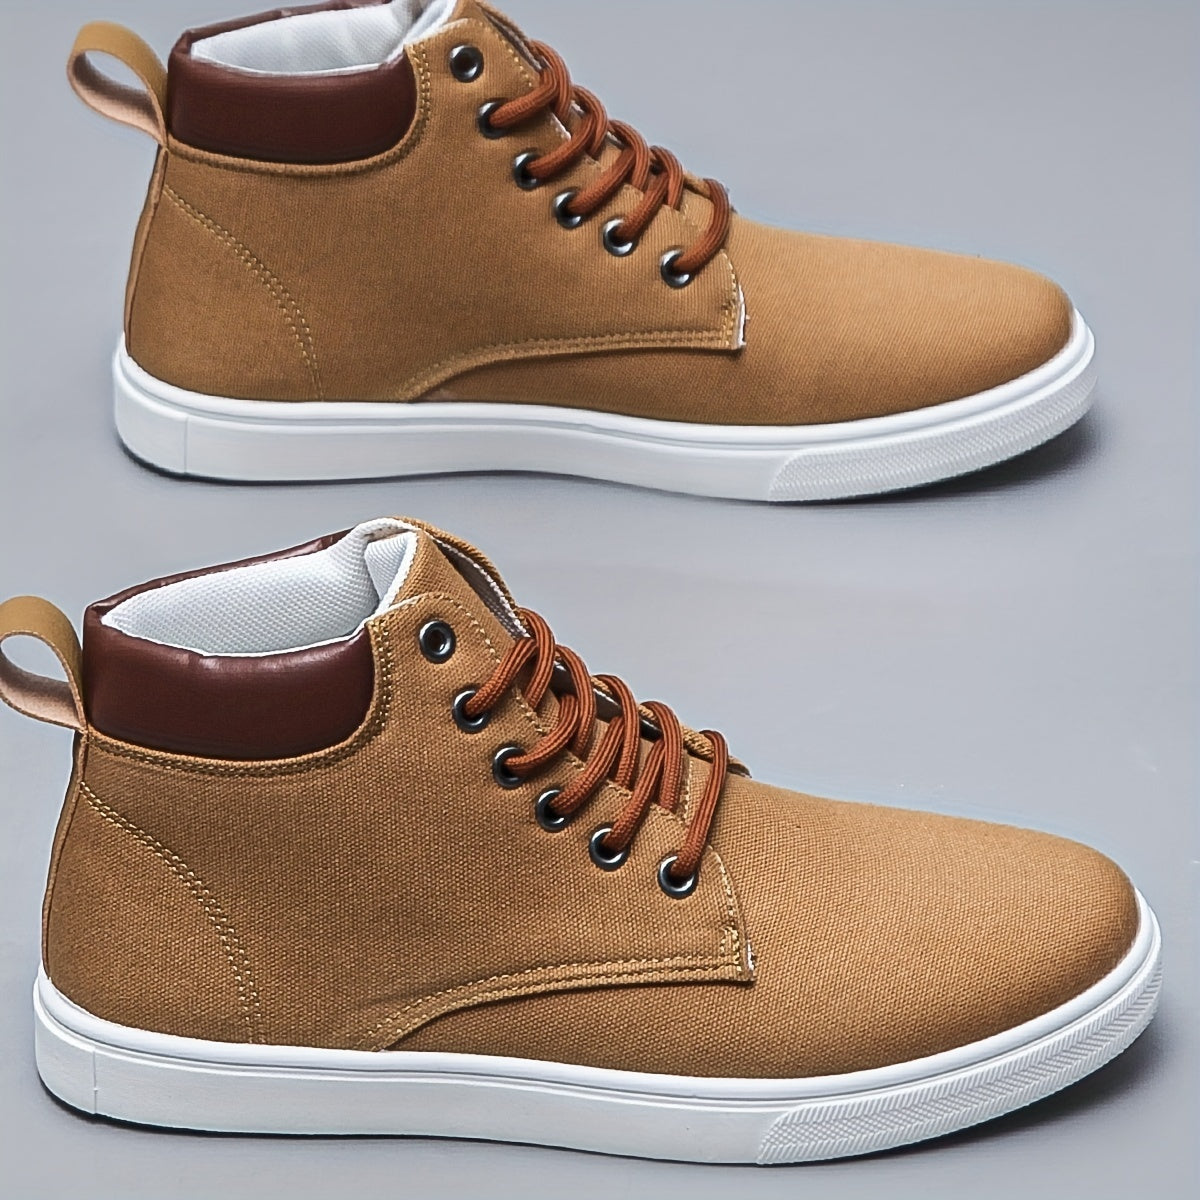 Canvas Skate Shoes With Good Traction, Men's Lace-up High Top Sneakers, Breathable , For Halloween